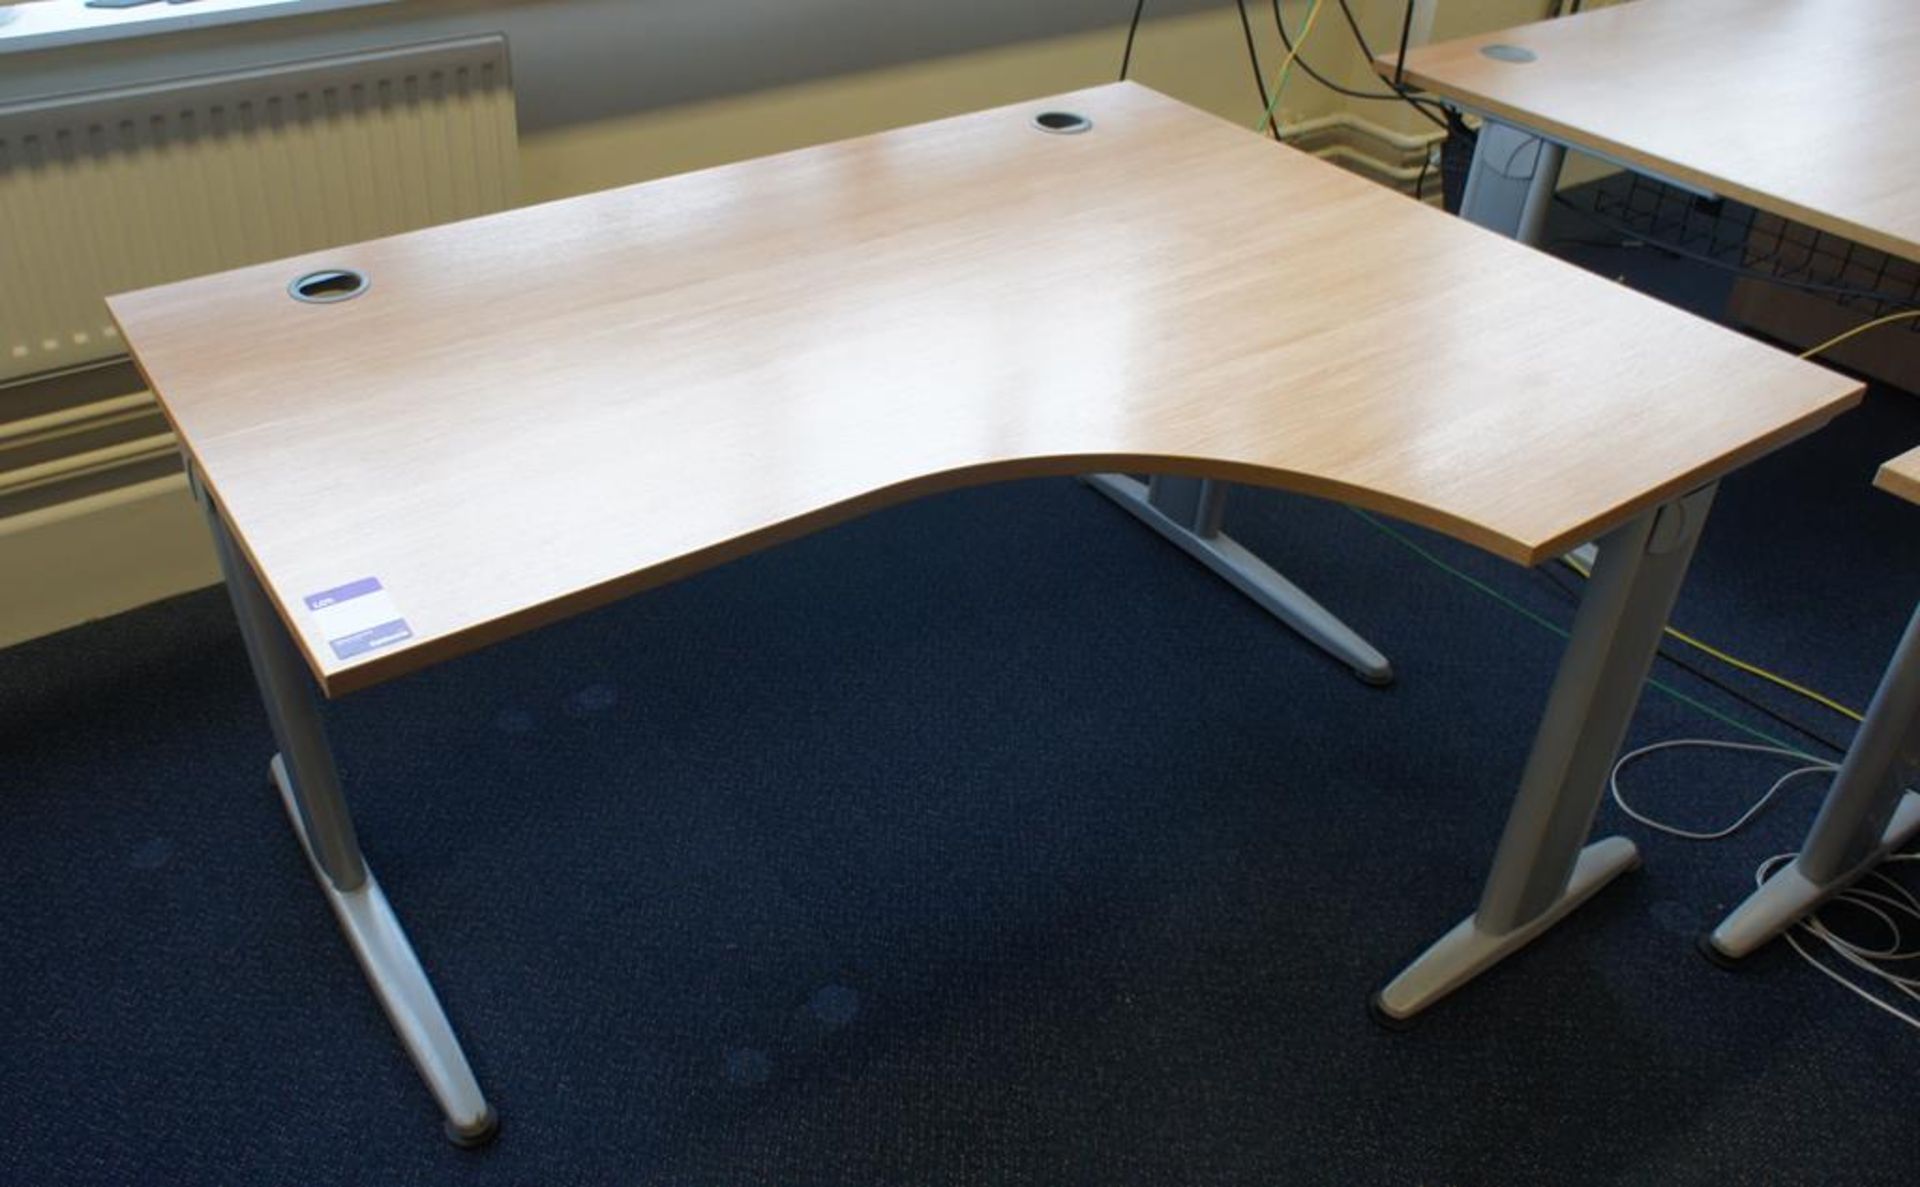 * Oak Effect R/H Radius Desk 1600 x 1200 Photographs are provided for example purposes only and do